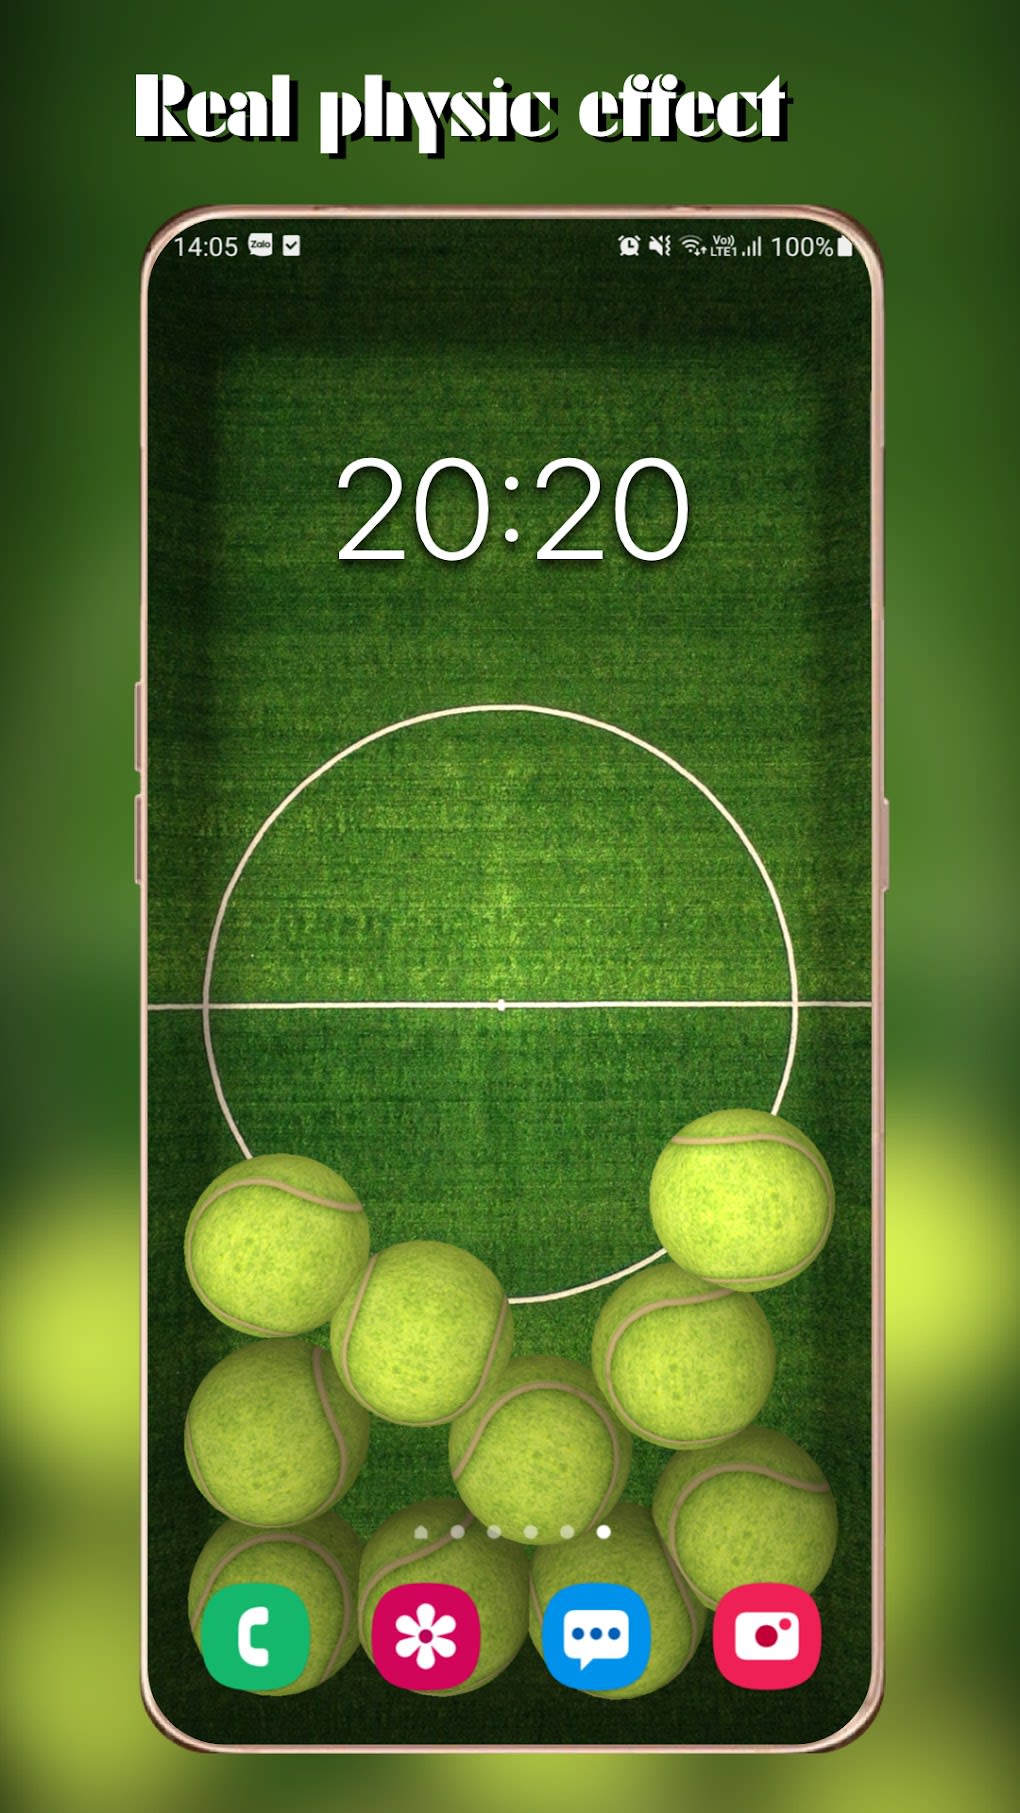 3D My Name Live Wallpaper - Gravity background cho Android - Tải về